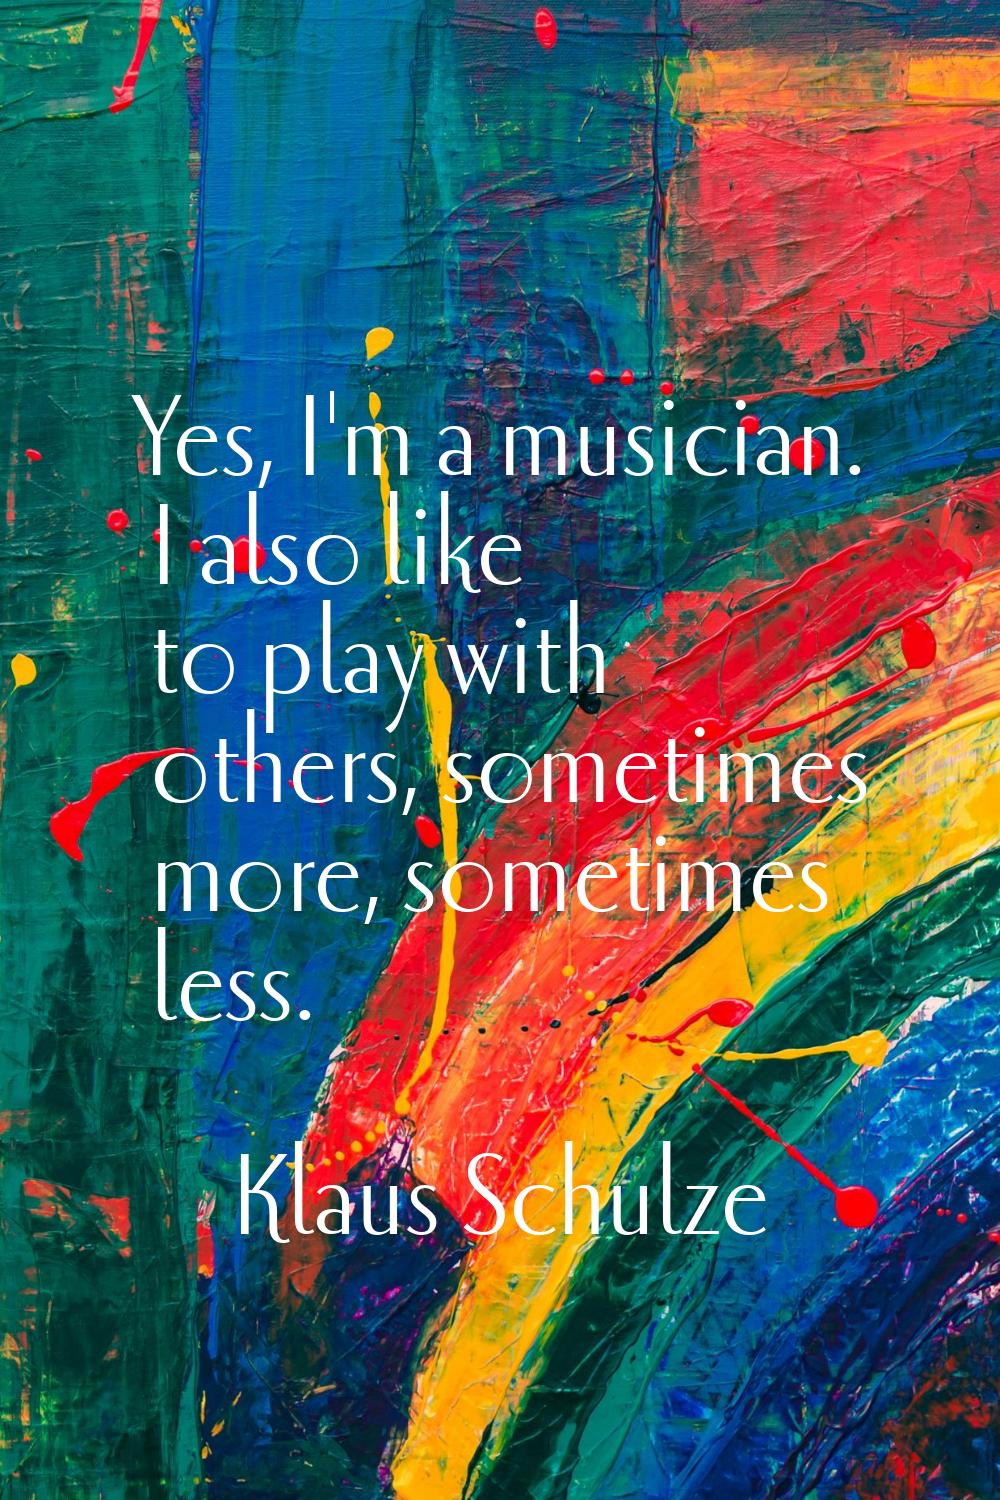 Yes, I'm a musician. I also like to play with others, sometimes more, sometimes less.